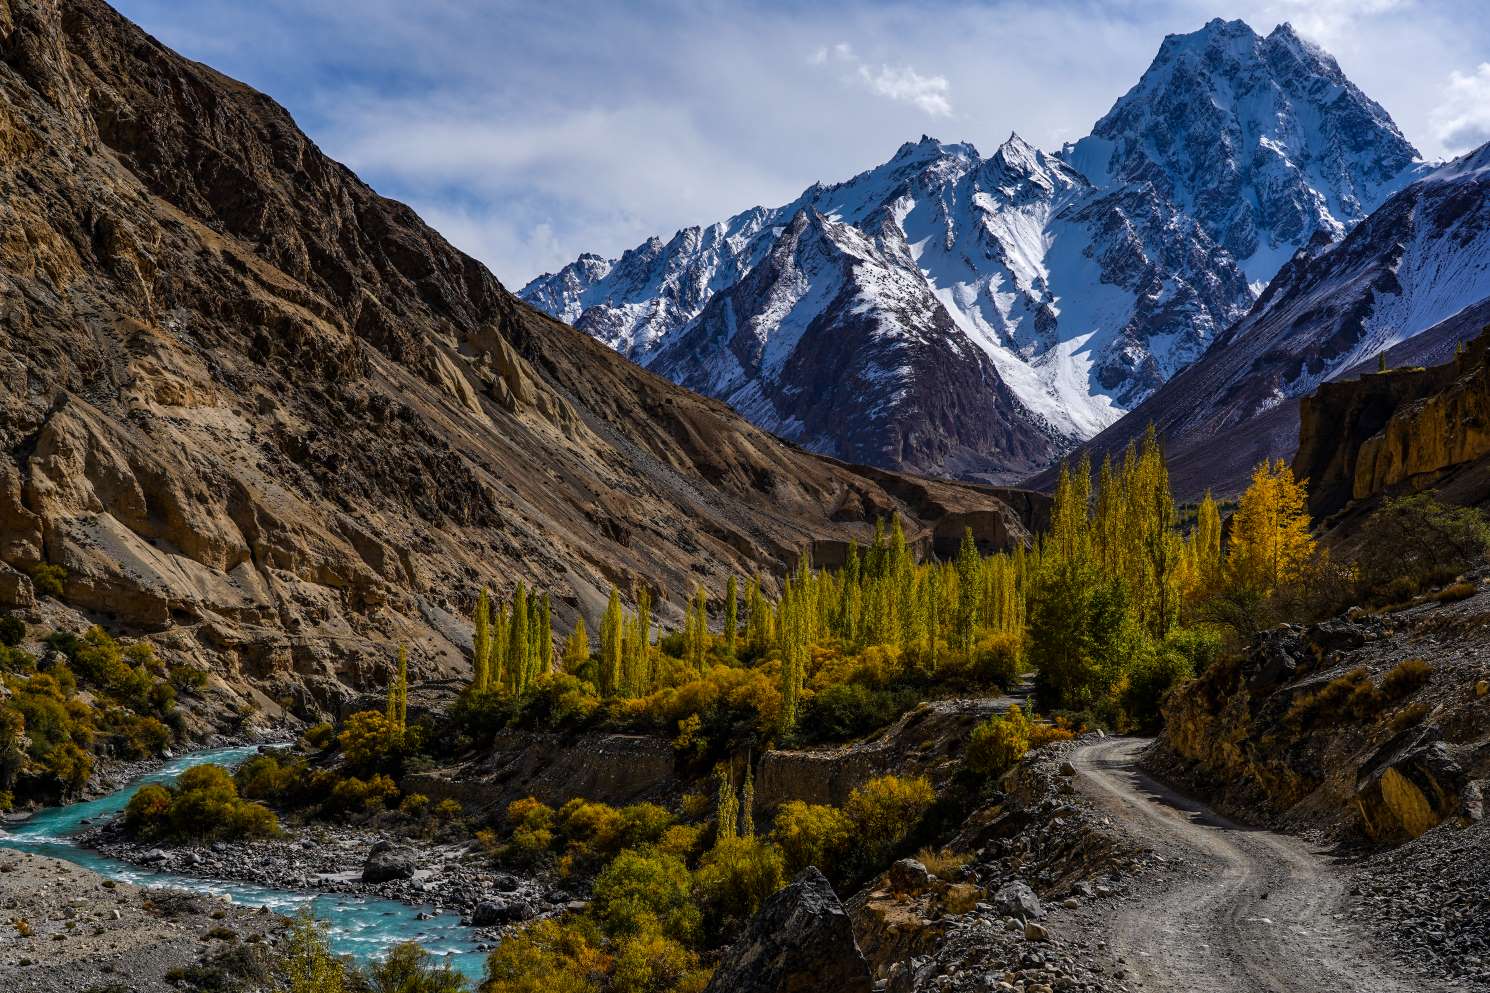 a collection of yellow poplar trees in front of a jagged snowcapped mountain and bright blue river in chapursan hunza valley pakistan